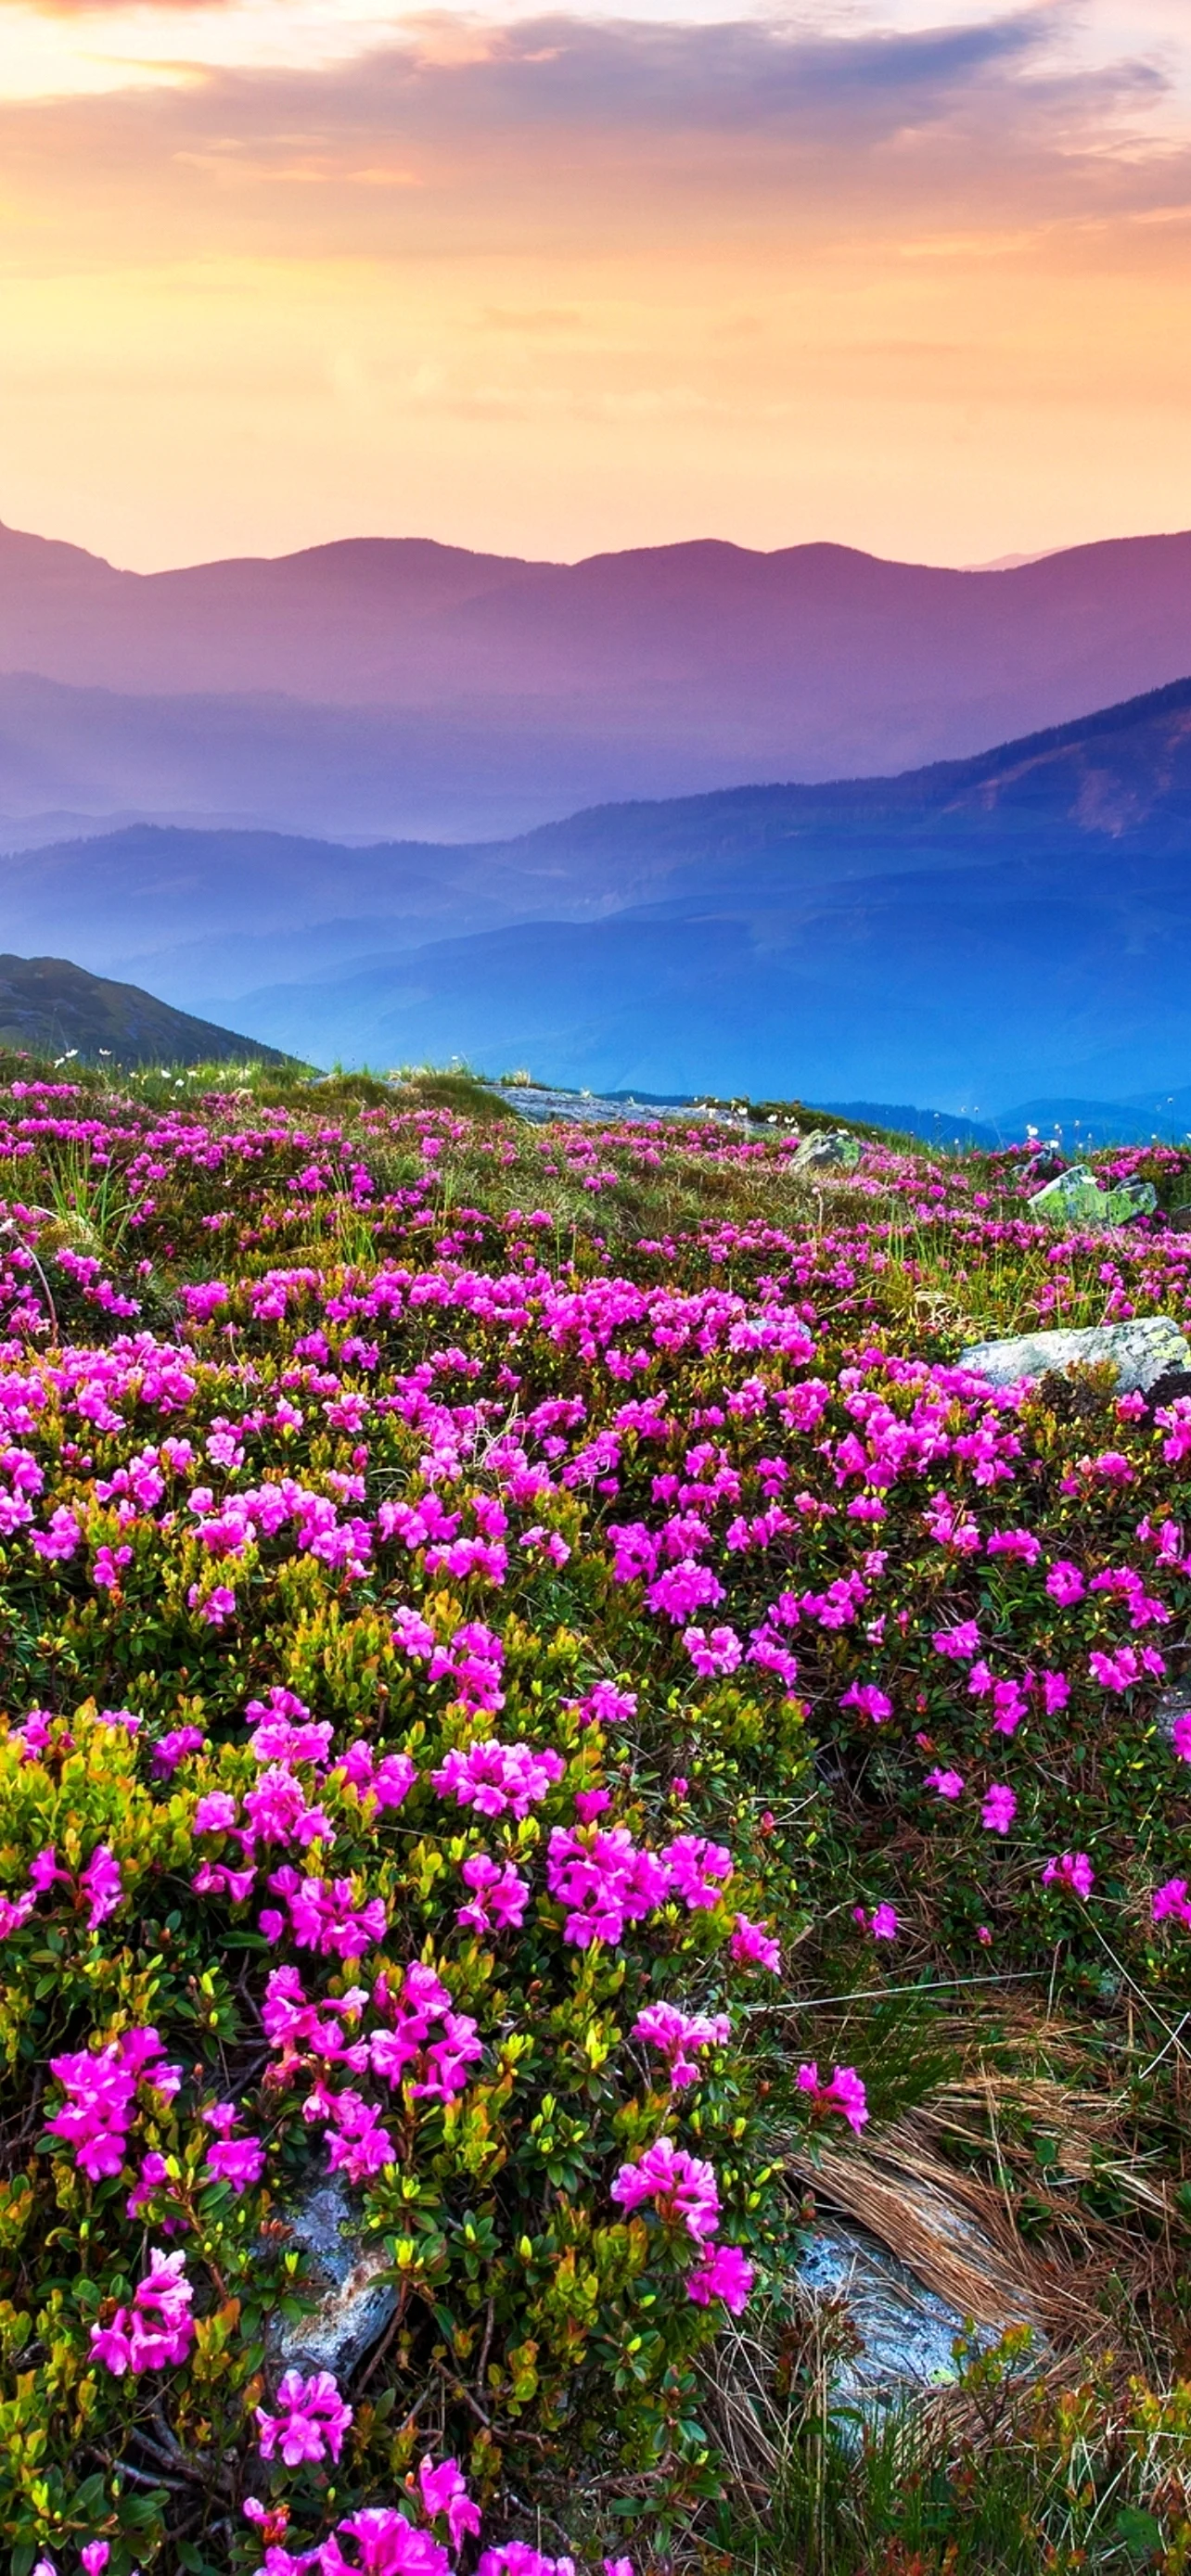 Sunrise Over Gorgeous Mountain Flowers Wallpaper for iPhone 12 Pro Max